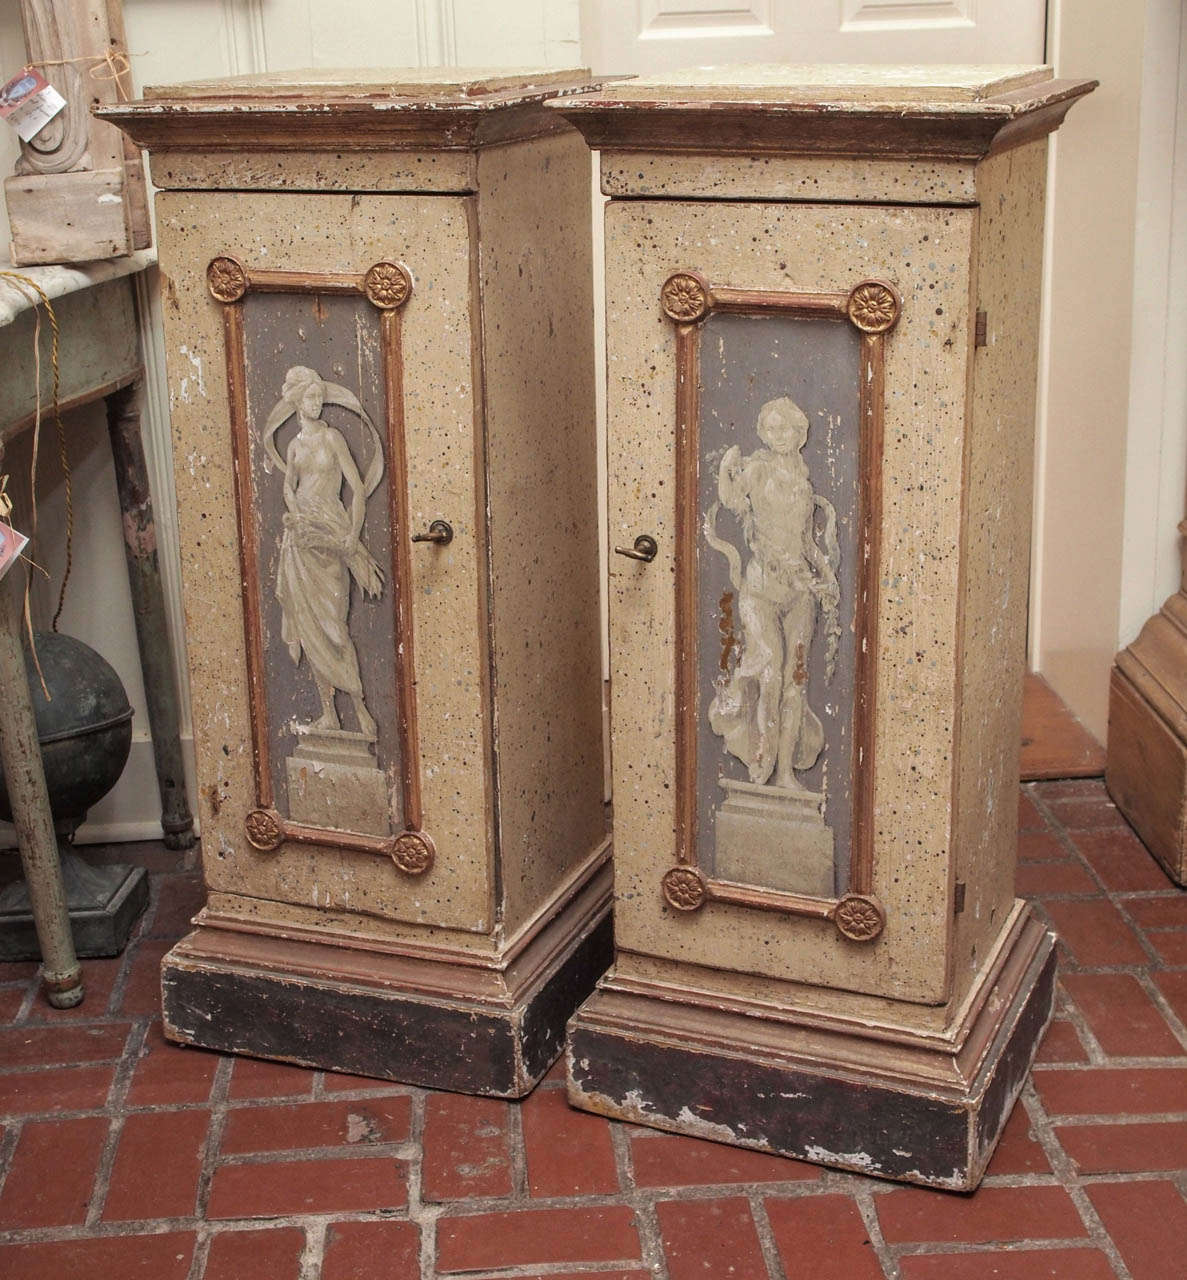 A pair of 19th century Italian painted plinths with faux bas relief motifs and giltwood accents. They are actually cabinets with one interior shelf. Original hardware and keys.